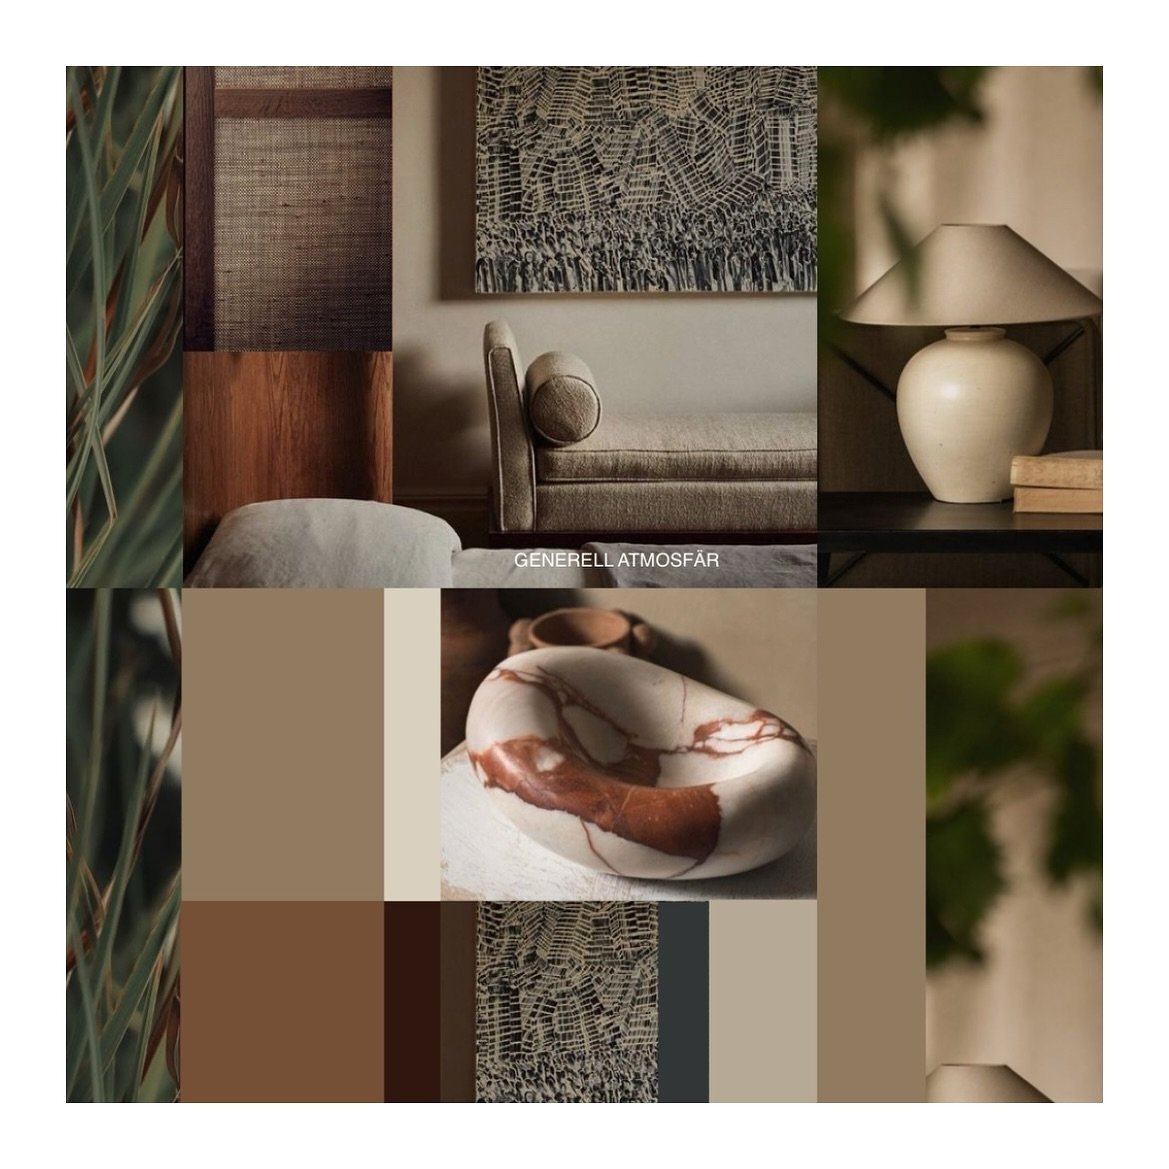 New work in process!

One of the best things we know is when clients come back to Us for help in their new projects 🧡

&ldquo;Villa Bromma&rdquo; is one of those projects where we have the joy to work with our lovely client again! 

Sneak and peak f